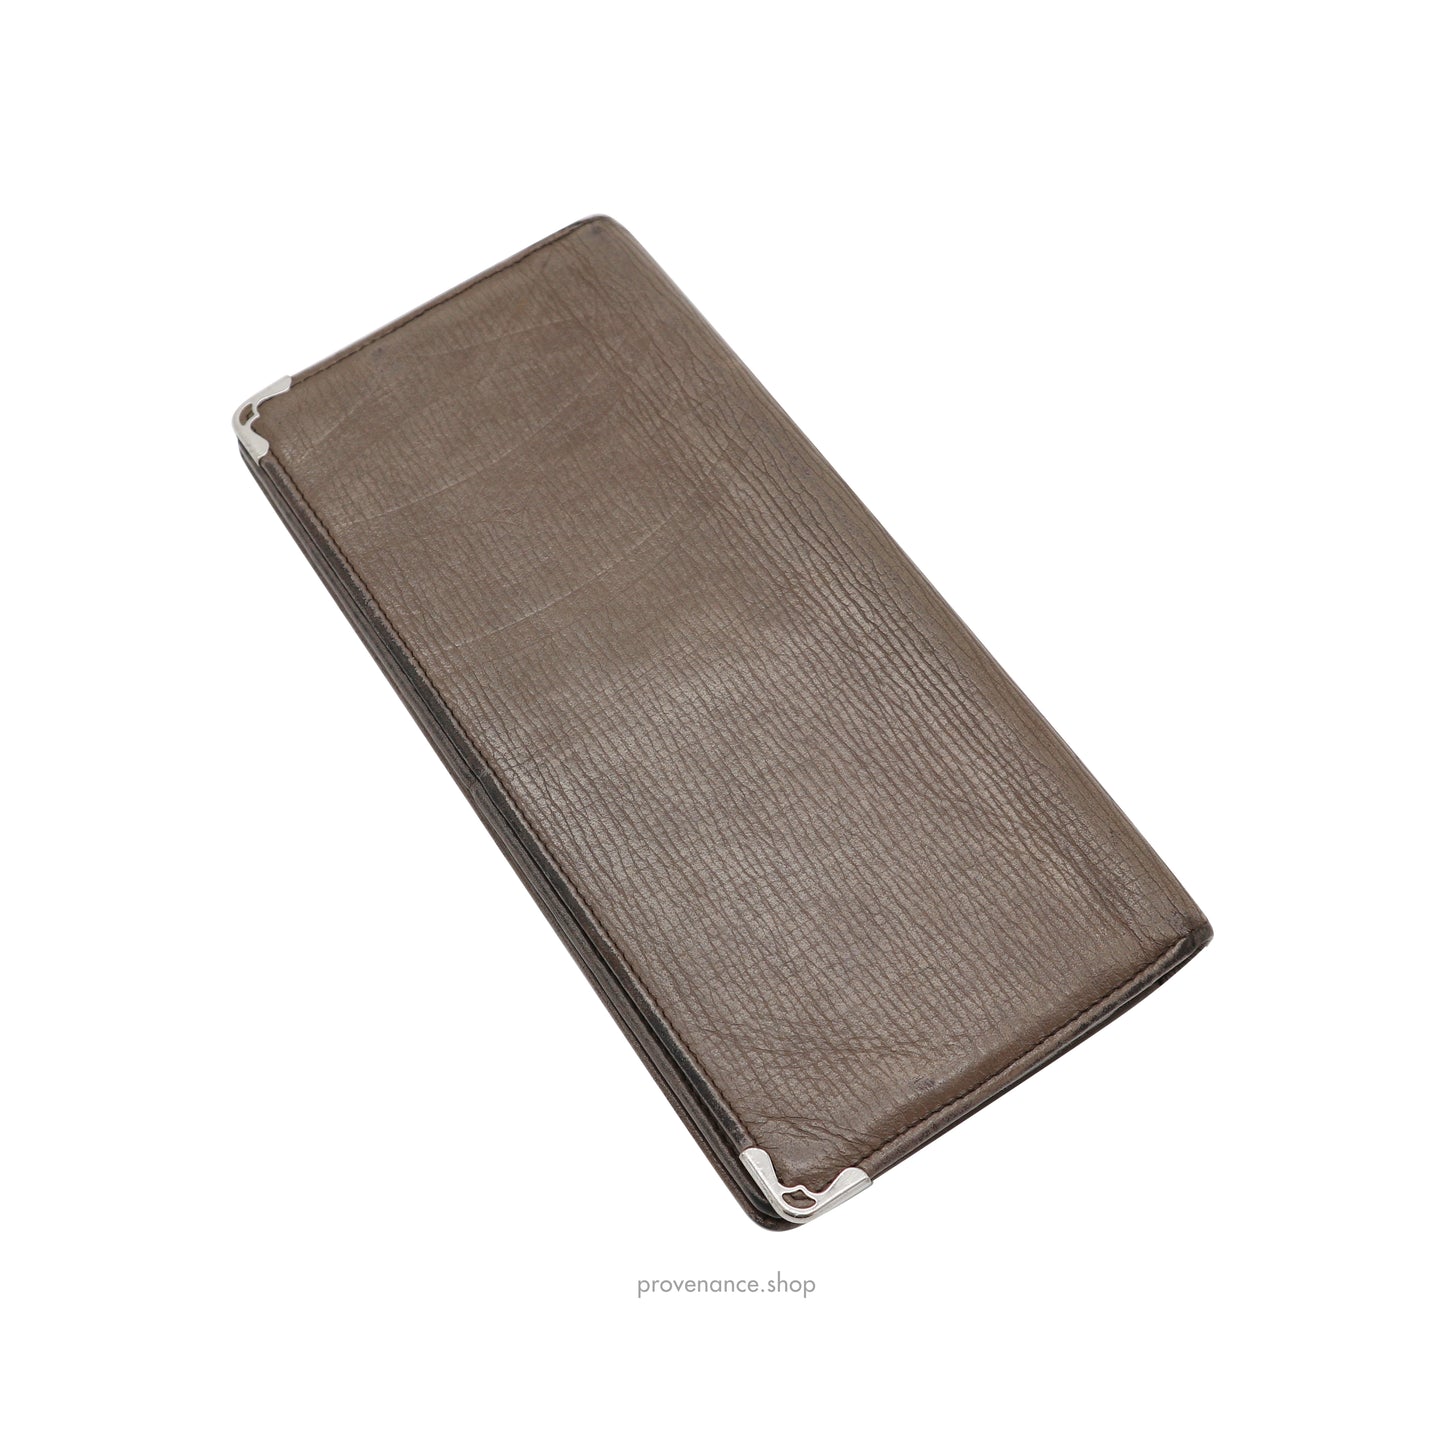 Cartier Long Wallet - Taupe Leather